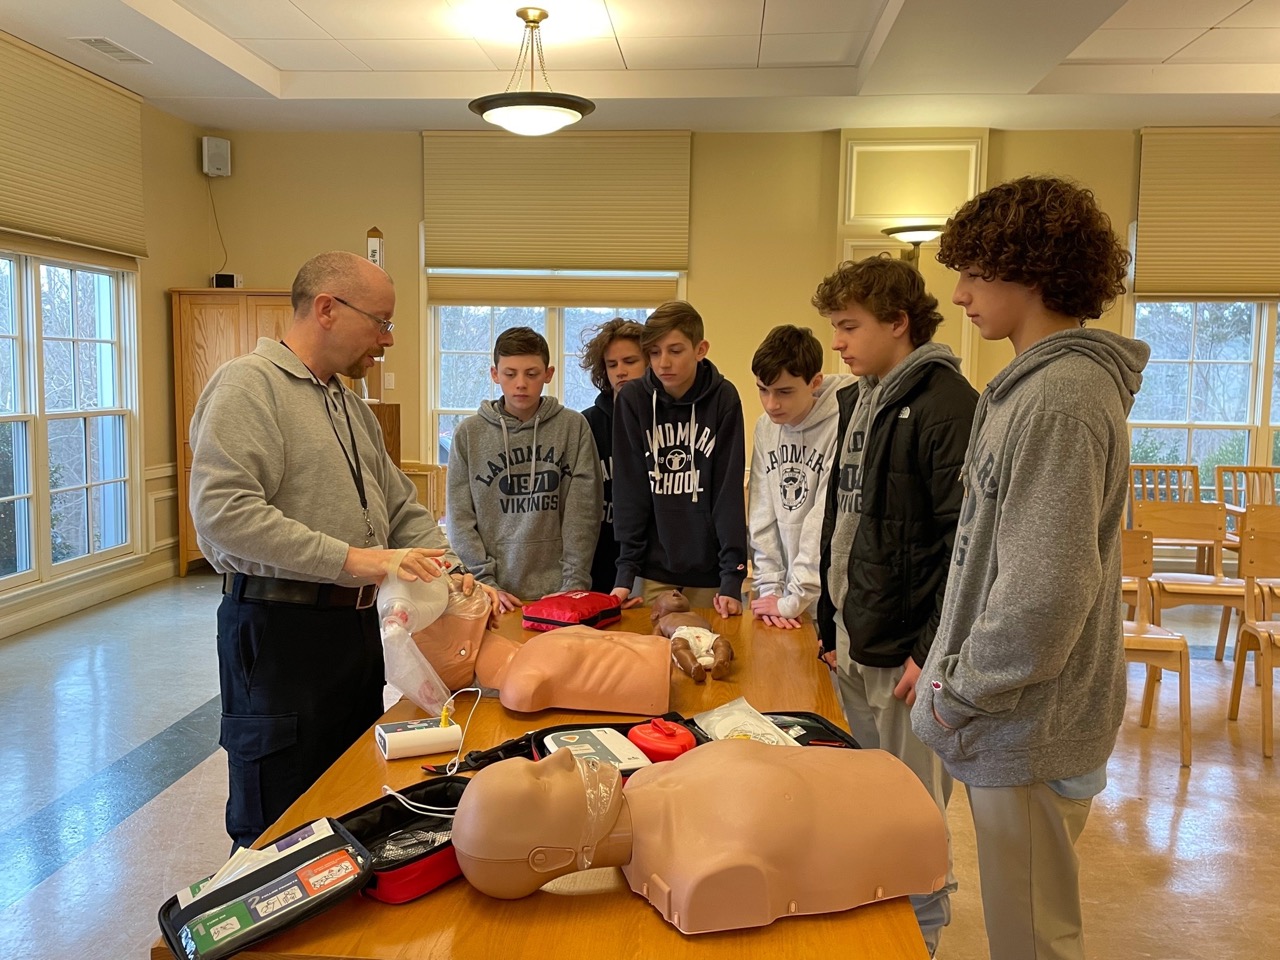 CPR-AED Training